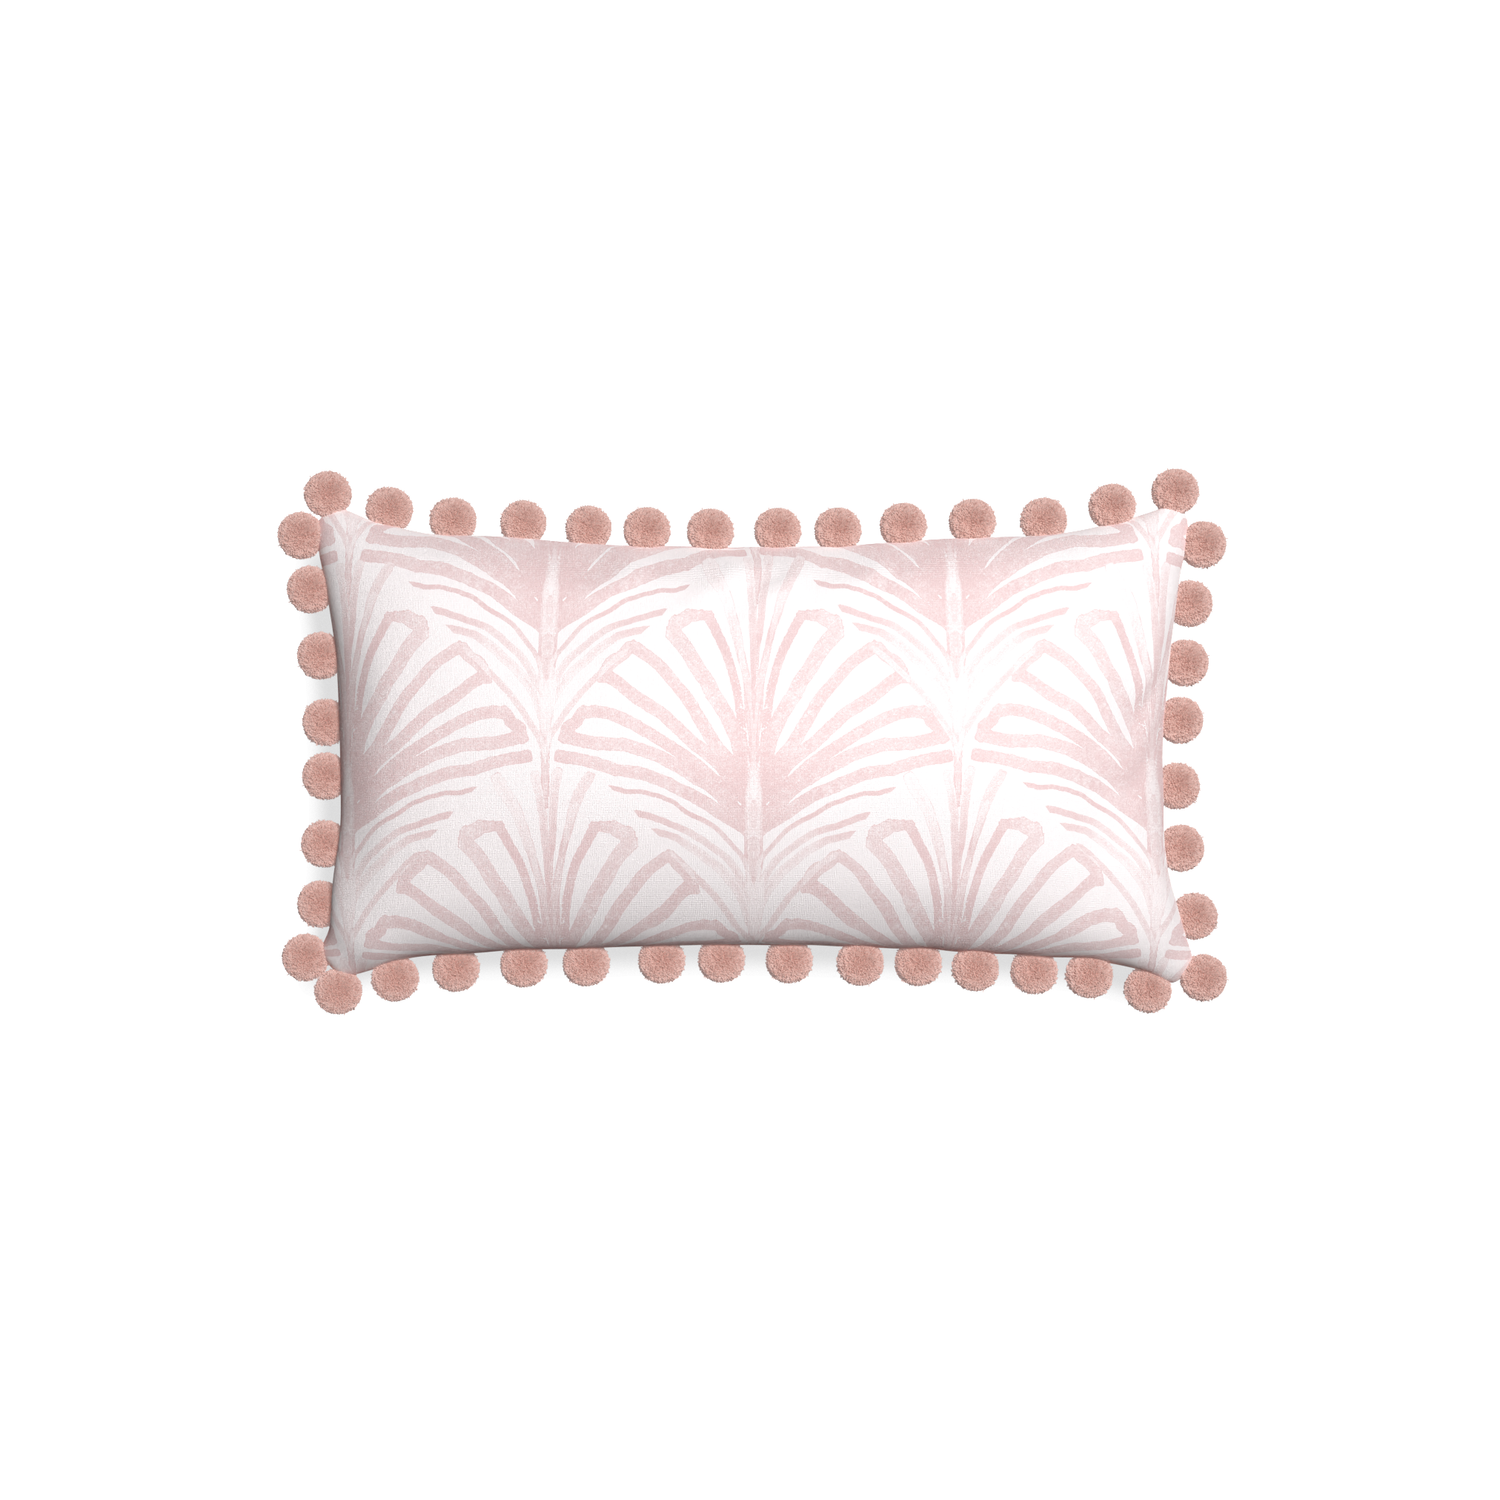 Petite-lumbar suzy rose custom rose pink palmpillow with rose pom pom on white background